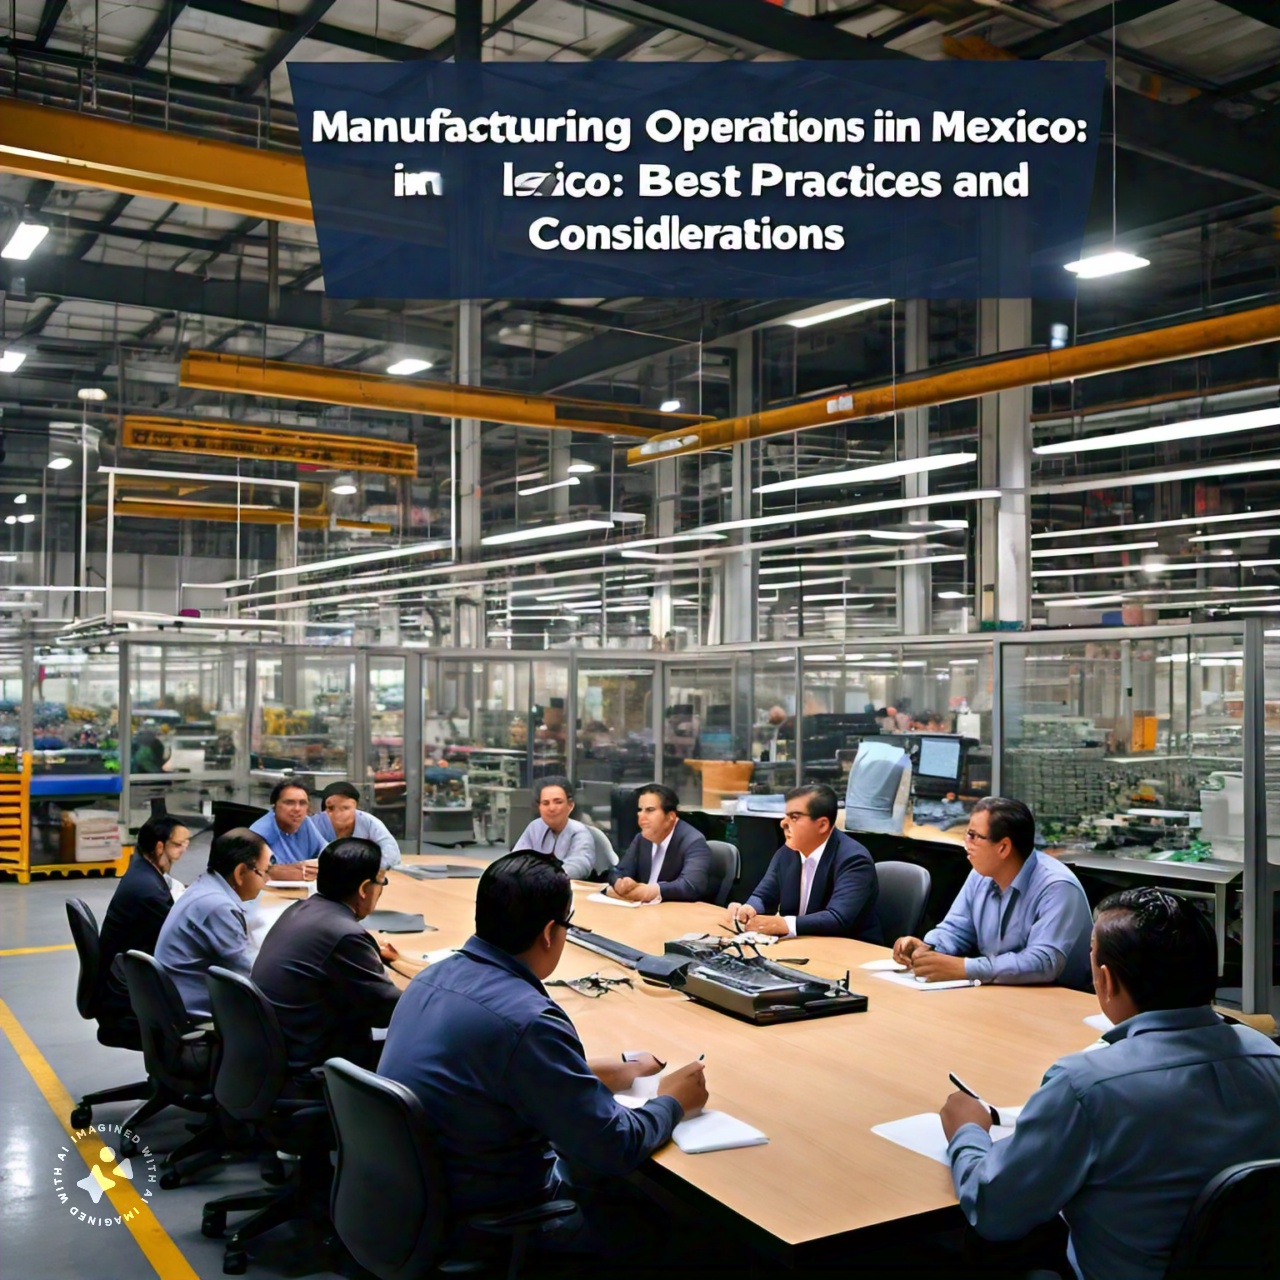 Manufacturing Operations in Mexico: Best Practices and Considerations